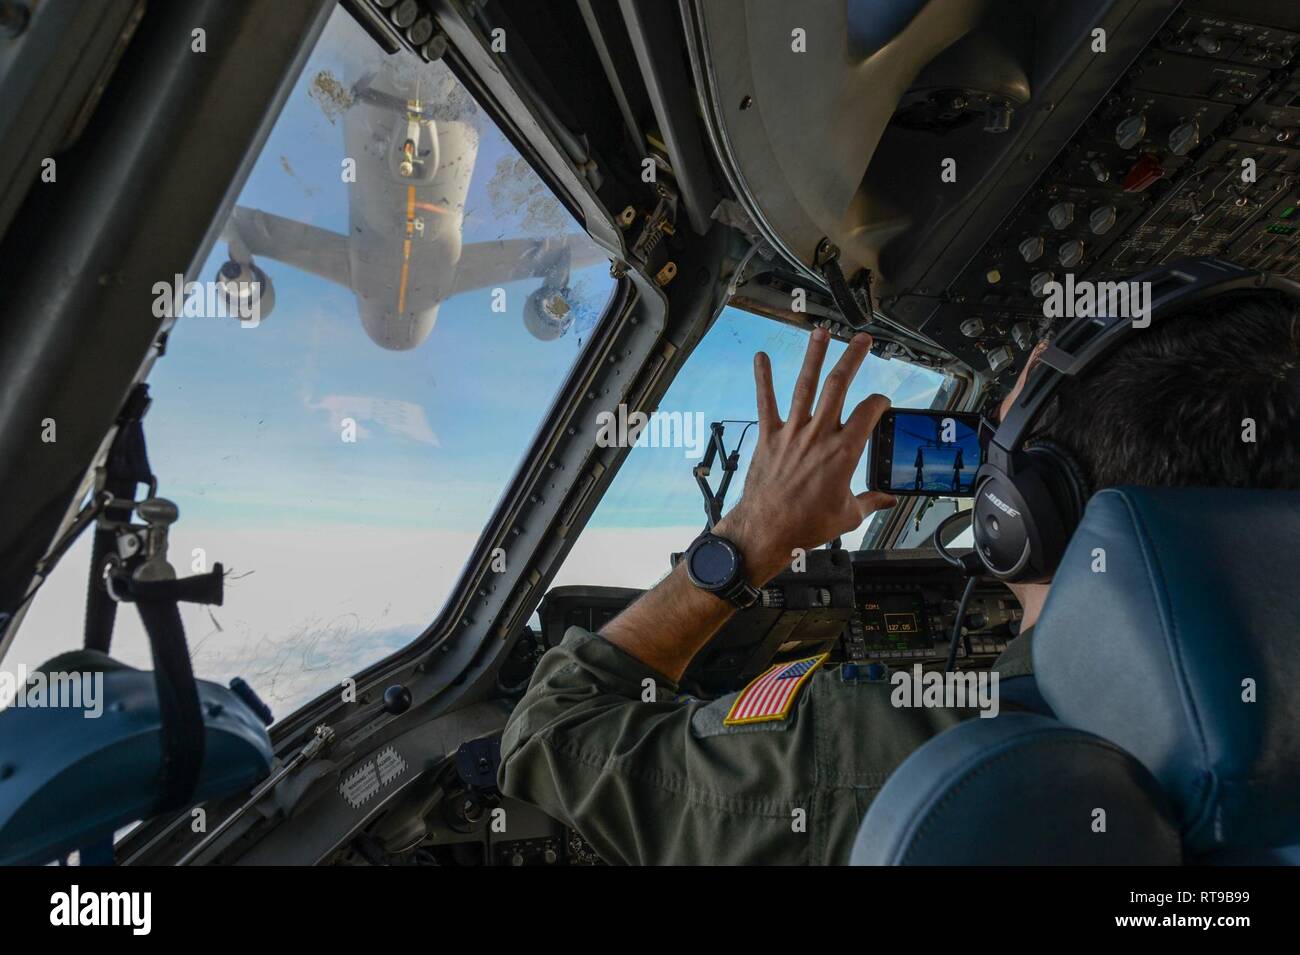 Capt. Ryan Arsenault, 7th Airlift Squadron (AS) pilot, documents training while Maj. Gene Ballou, 313th AS pilot, prepares to refuel from a KC-46 Pegasus. Over 170 KC-46s are planned to replace aging tankers and revitalize the Air Force tanker fleet. Stock Photo